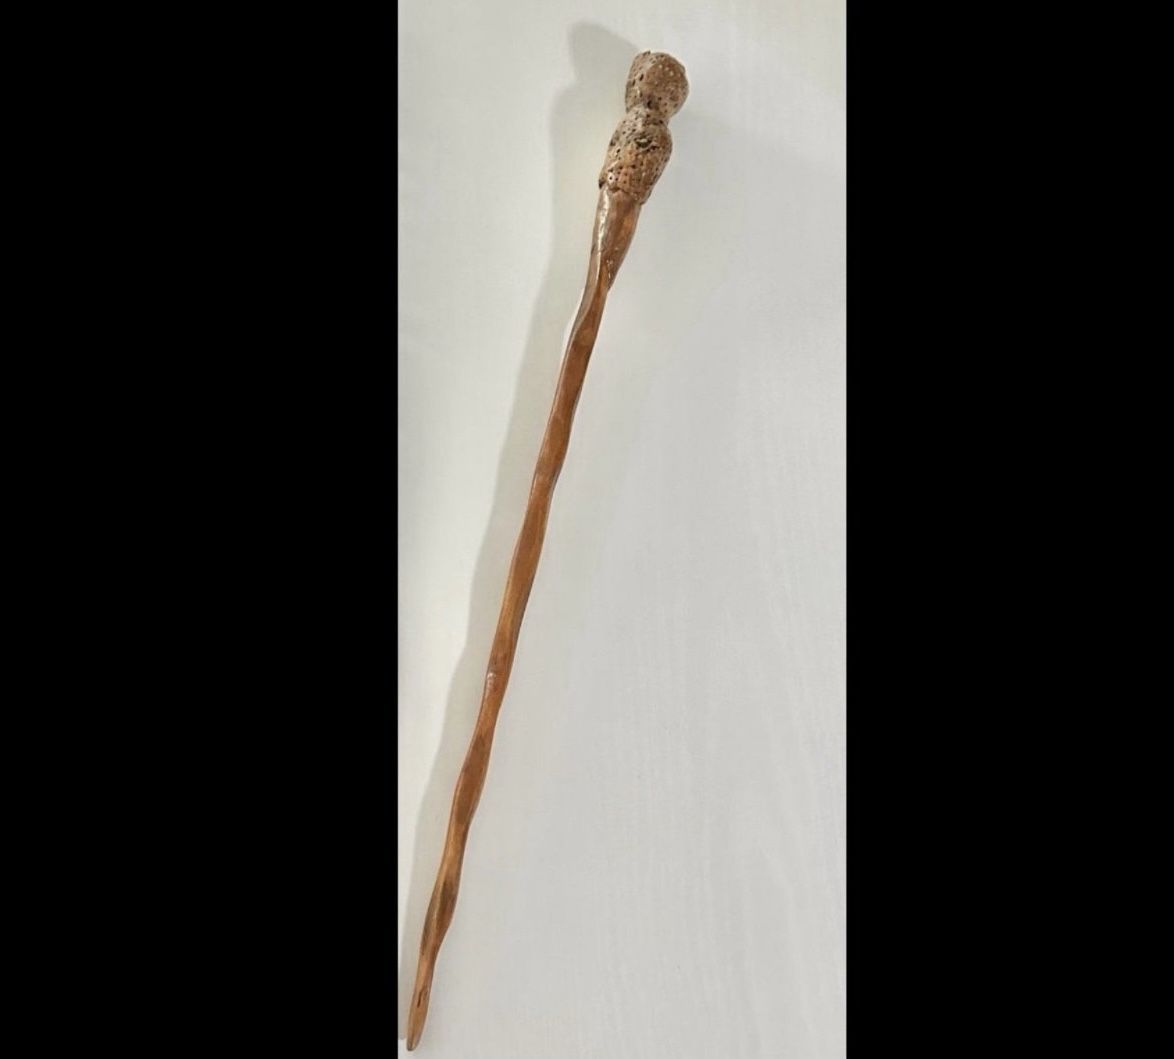 Harry Potter Film Series, High-Quality Replica of Harry Potter's 18- Inch Wand